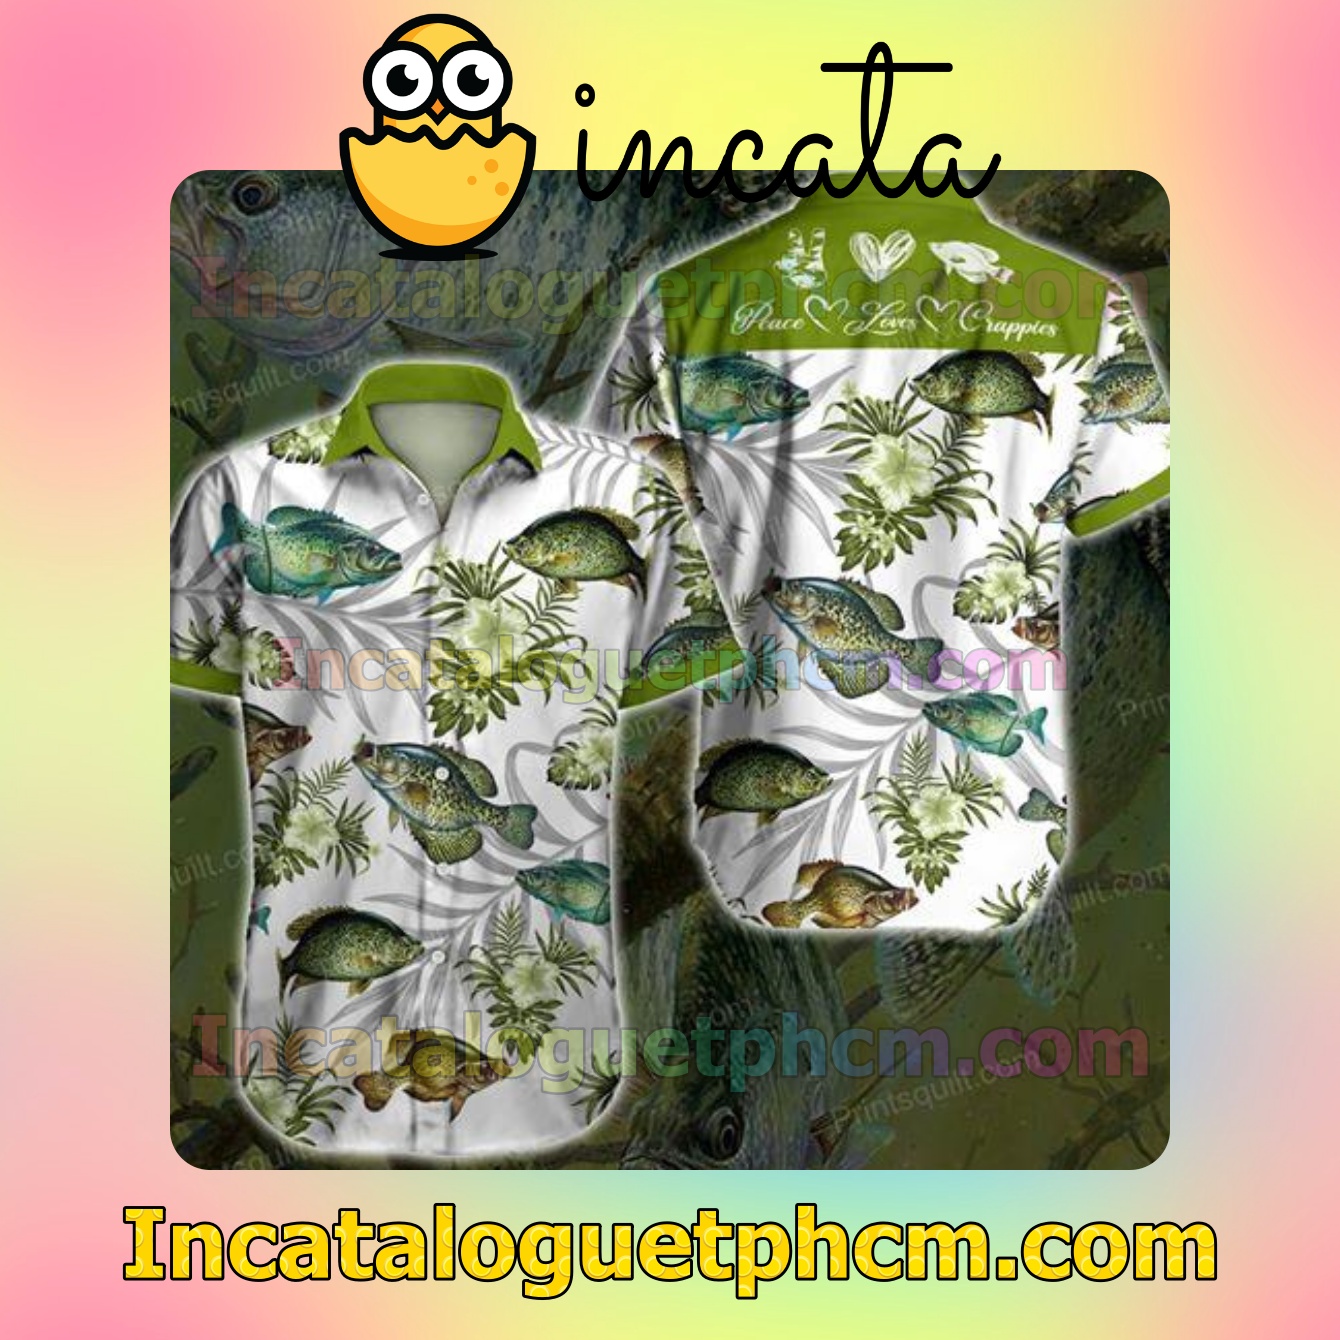 Crappie Lovers Peace Loves Crappies Green Tropical Floral White Mens Short Sleeve Shirts